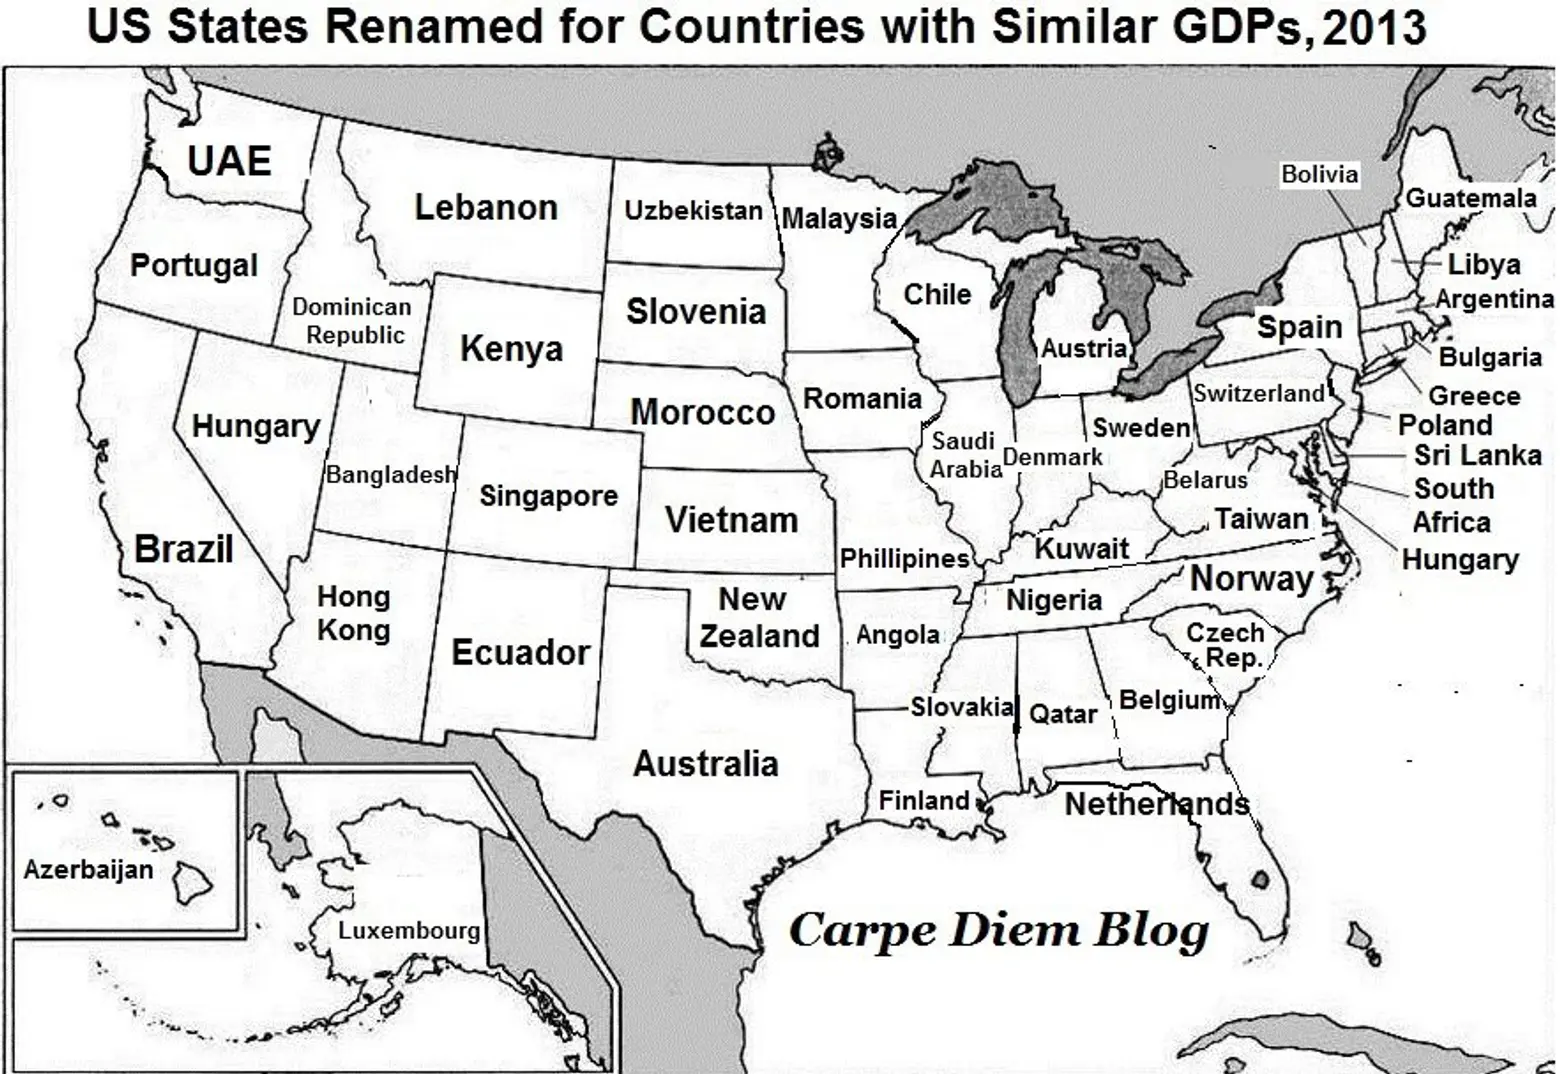 Money Mapped: New York Has the Same GDP as Spain